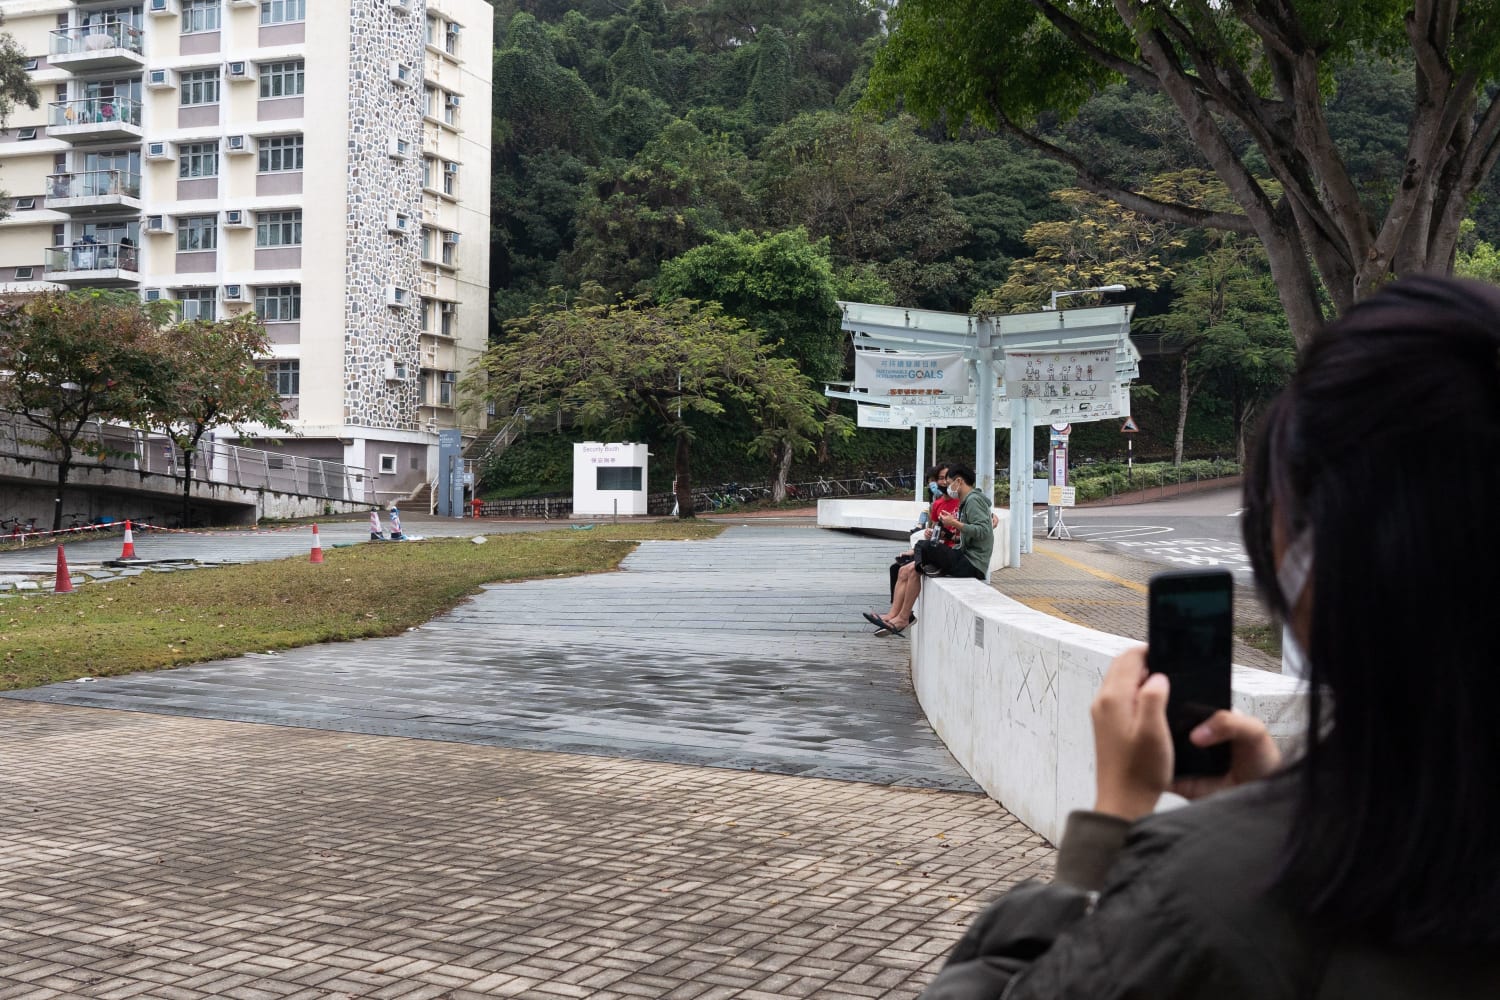 Two more Tiananmen sculptures removed from Hong Kong university campuses